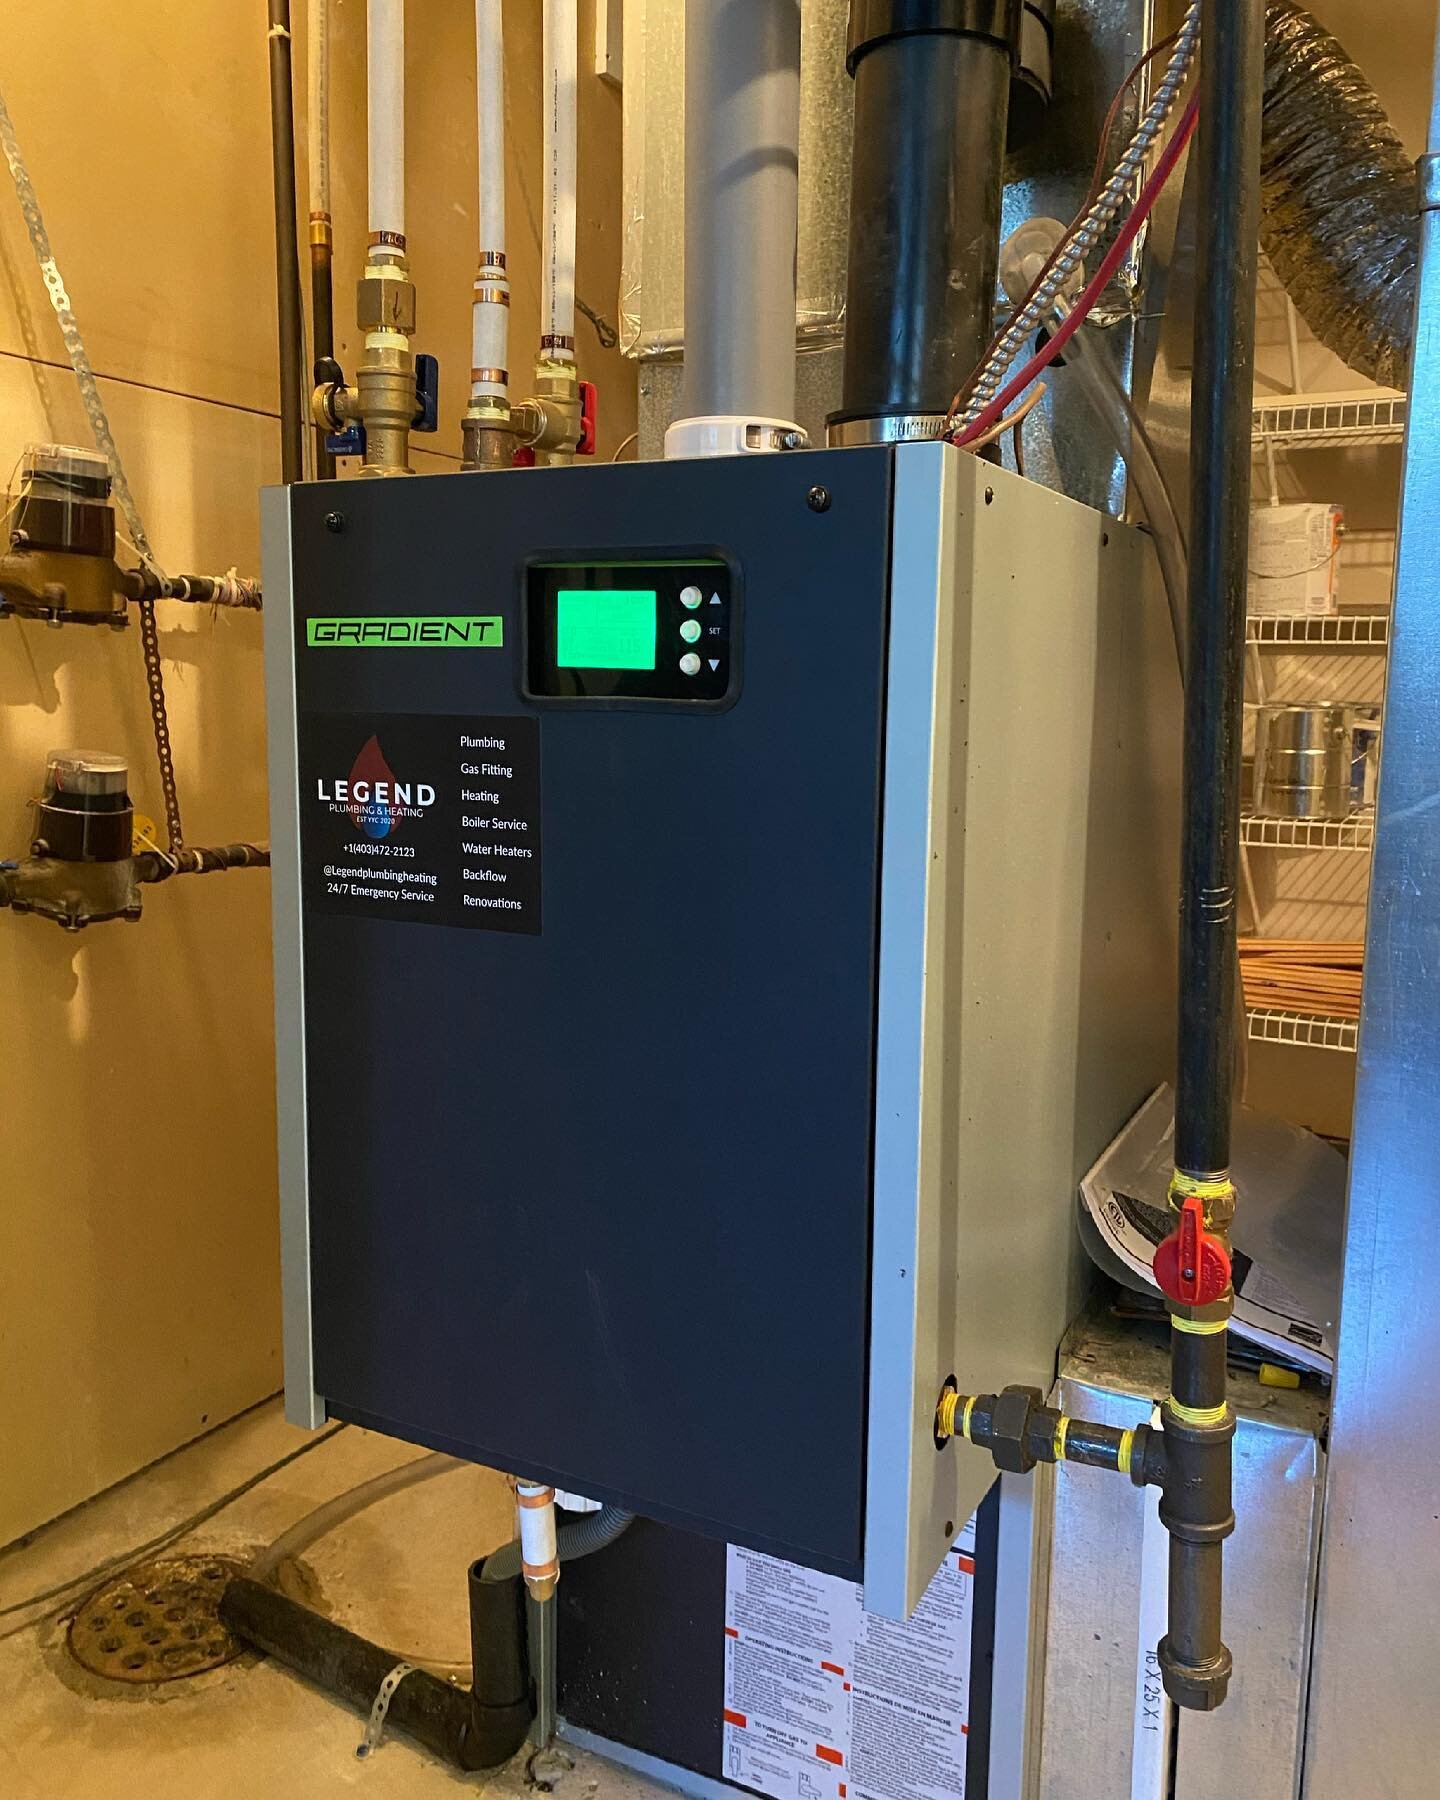 This mechanical room got a makeover!
&bull;
Swipe for the before and after glow-up
&bull;
We removed the old furnace and hot water tank and freed up a ton of space by installing a @gradientthermal SYNC furnace. This furnace does it all - hot water on